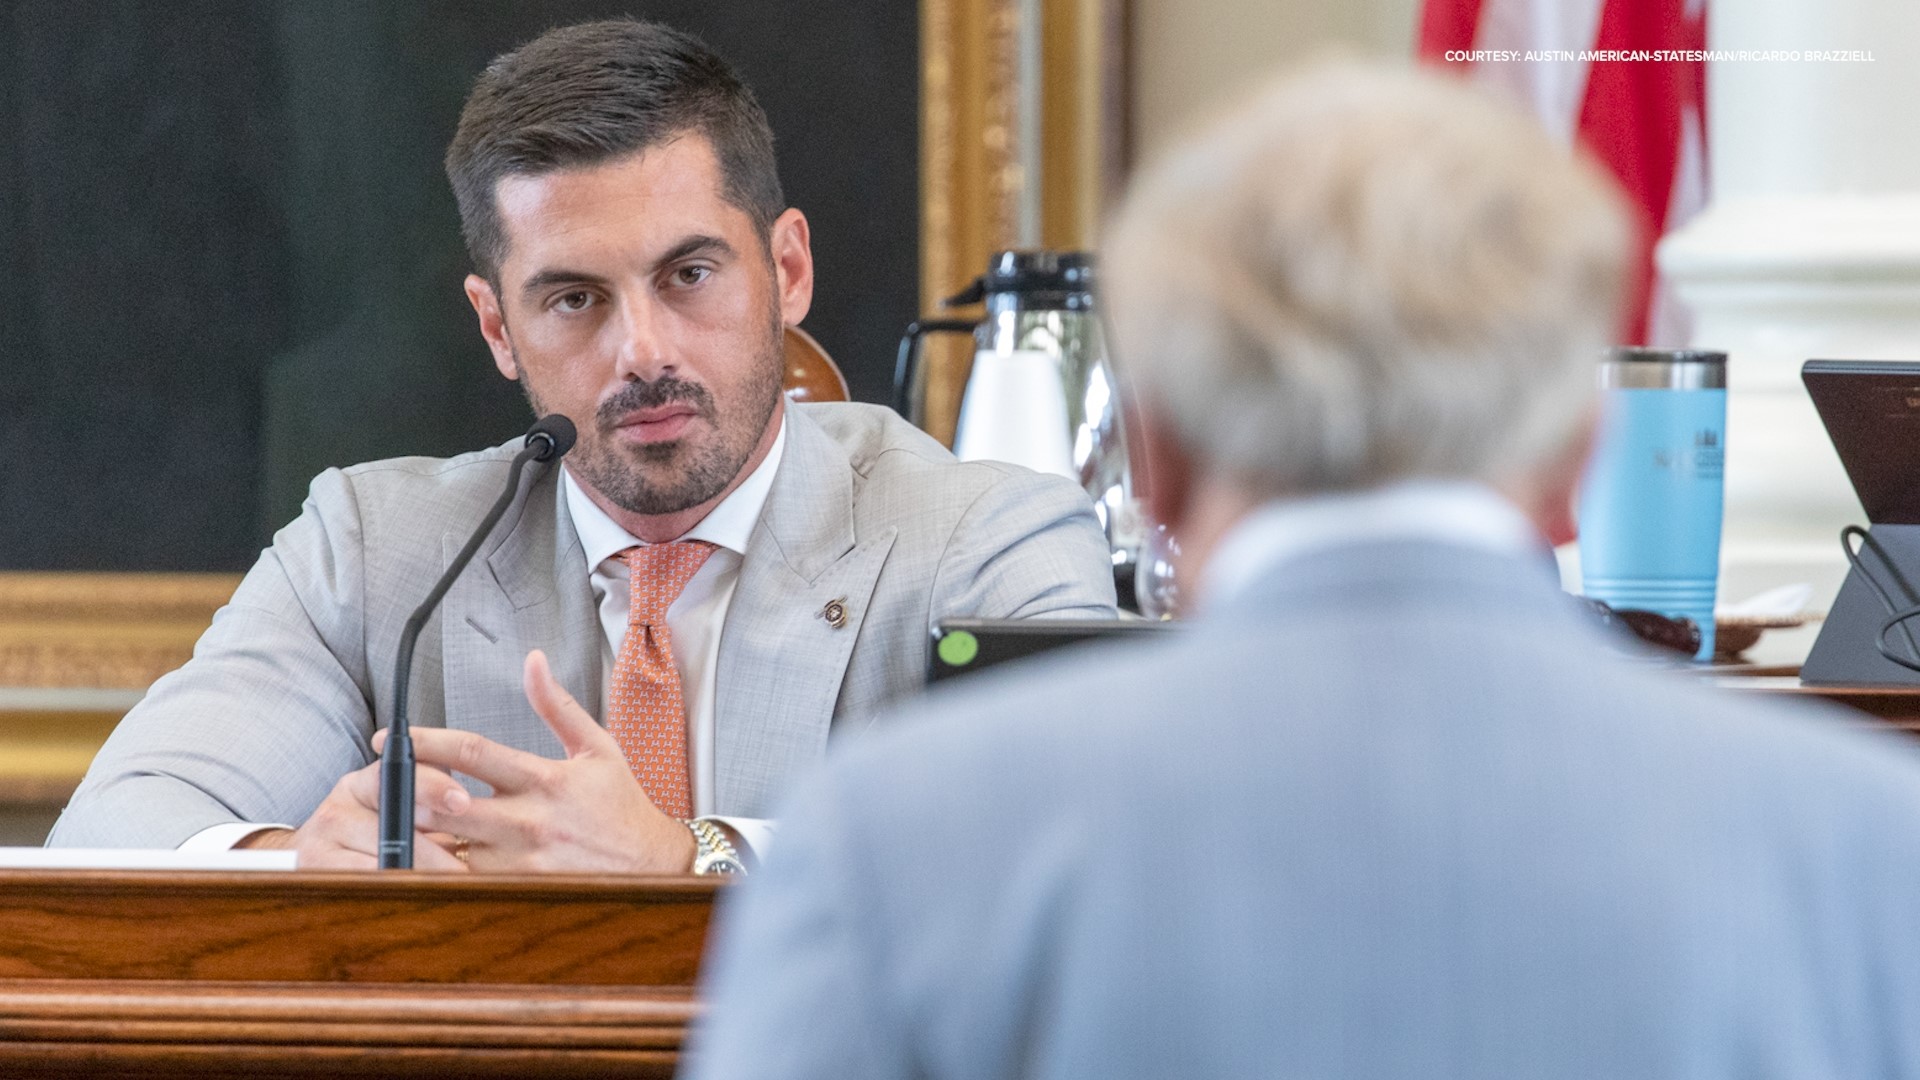 Brandon Cammack, the special prosecutor allegedly hired by Ken Paxton to investigate claims made by Nate Paul, said Paxton and his team fired him at an Austin Starbu